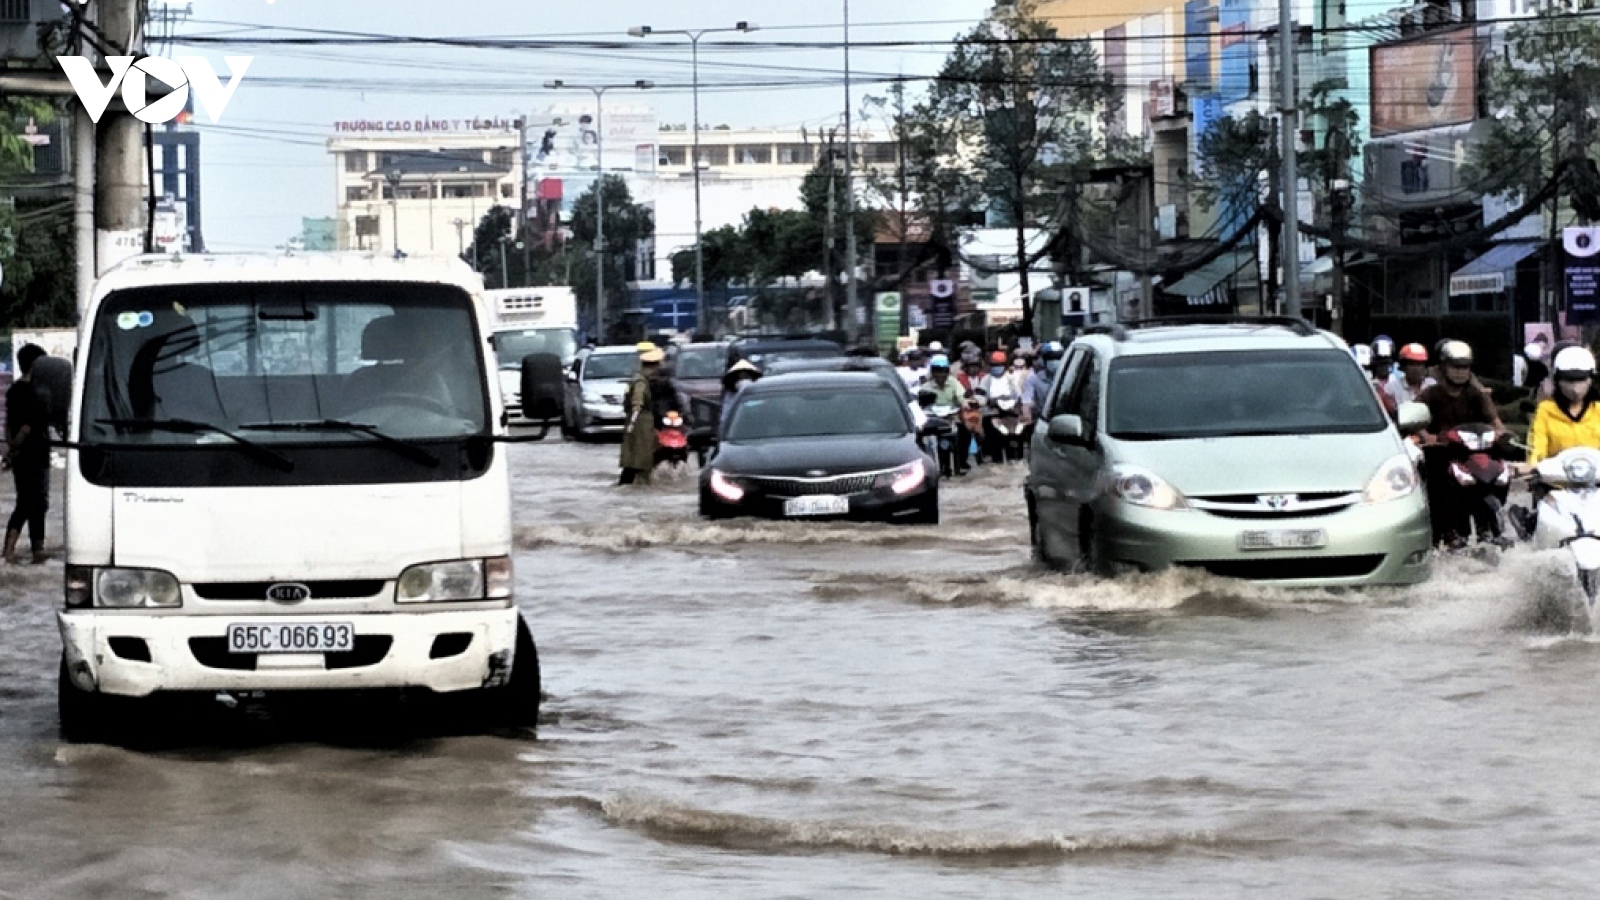 Rising tides lead to flood warning level 3 being issued in Mekong Delta region